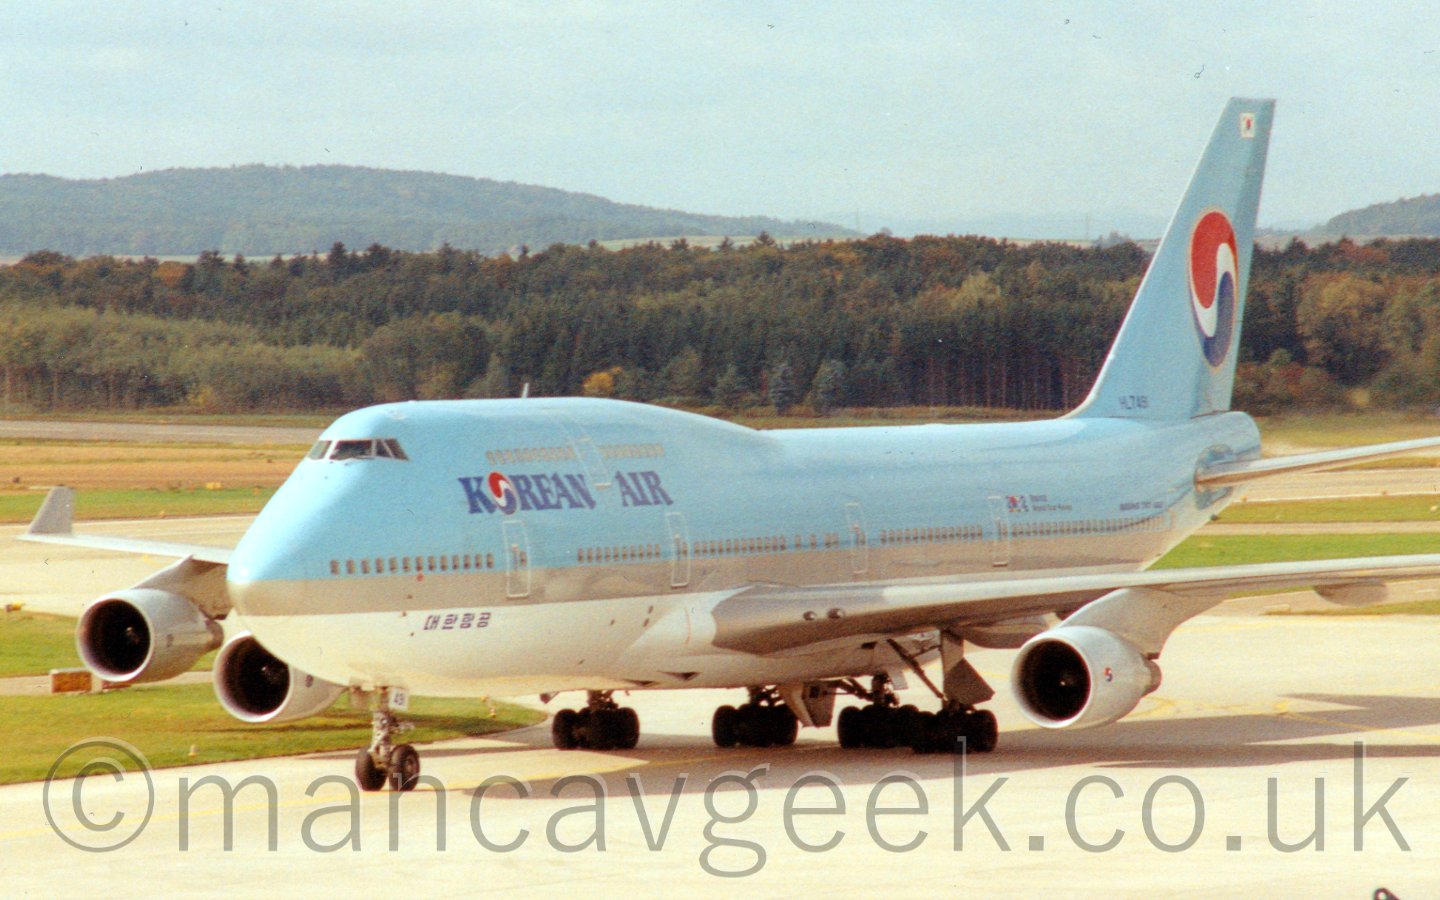 Side view of a blue, very large, 4 engined jet airliner taxiing from right to left and slightly towards the camera. The plane has a white belly, and blue Korean Air" titles on the upper forward fuselage, with a red, white, and blue Yin-Yang symbol on the tail. In the background, tree-covered rolling hills meet the hazy blue sky.